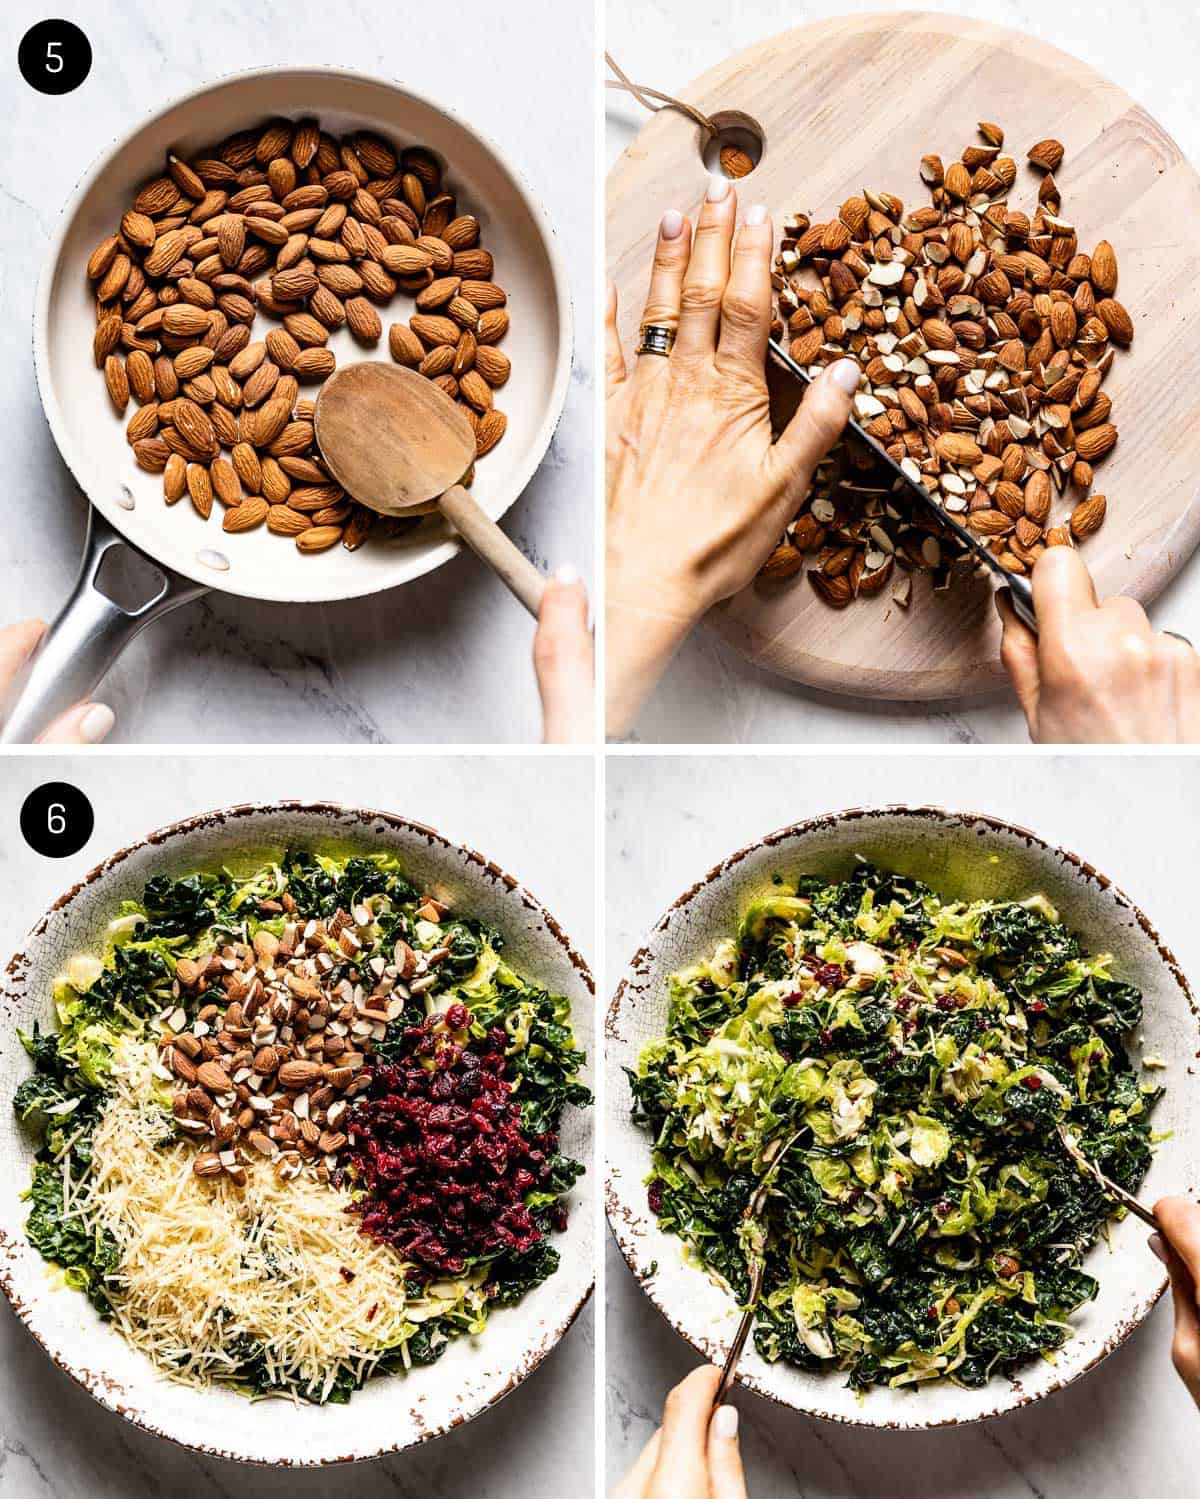 A person showing how to assemble a kale salad with toasted almonds from the top view.